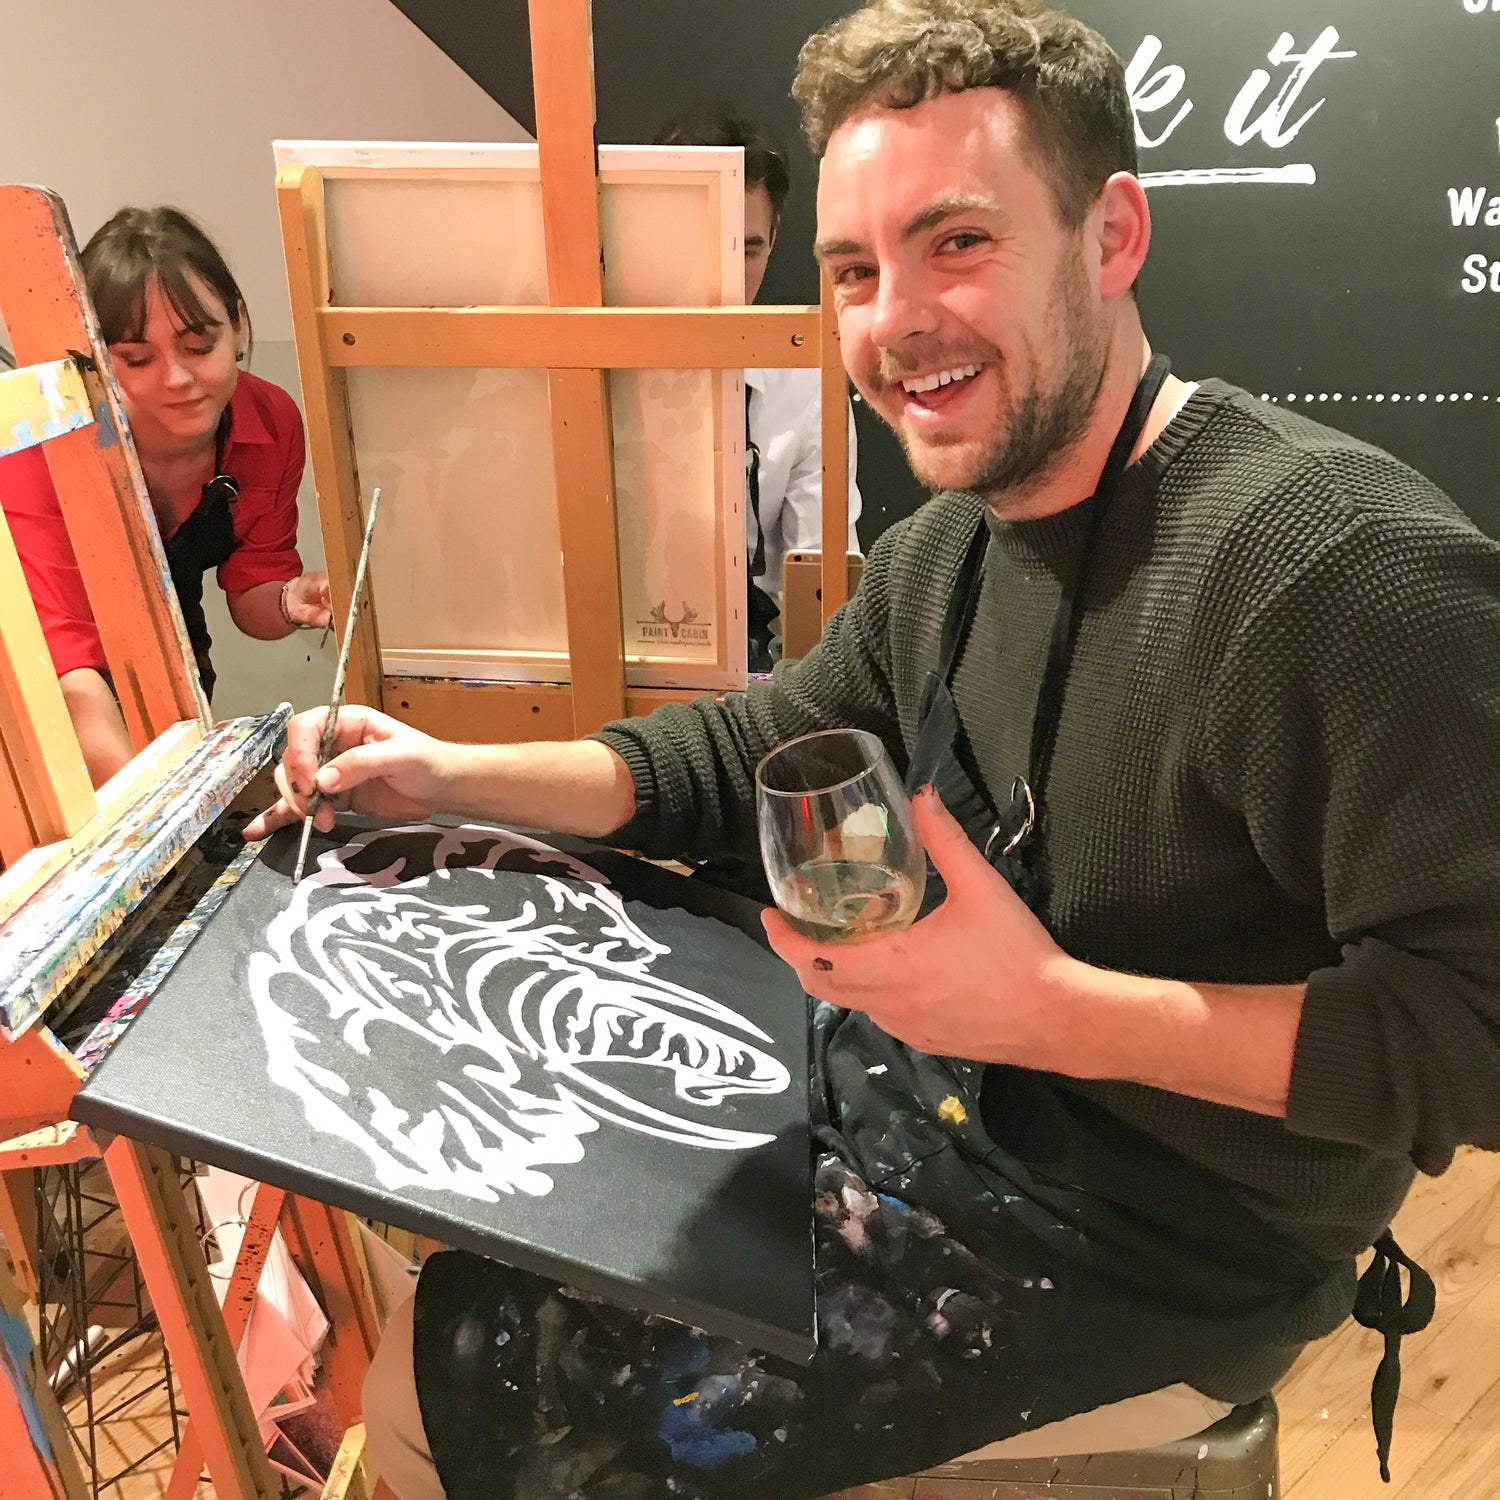 Person holding a wine glass enjoying a paint and drink activity at Paint Cabin in Toronto